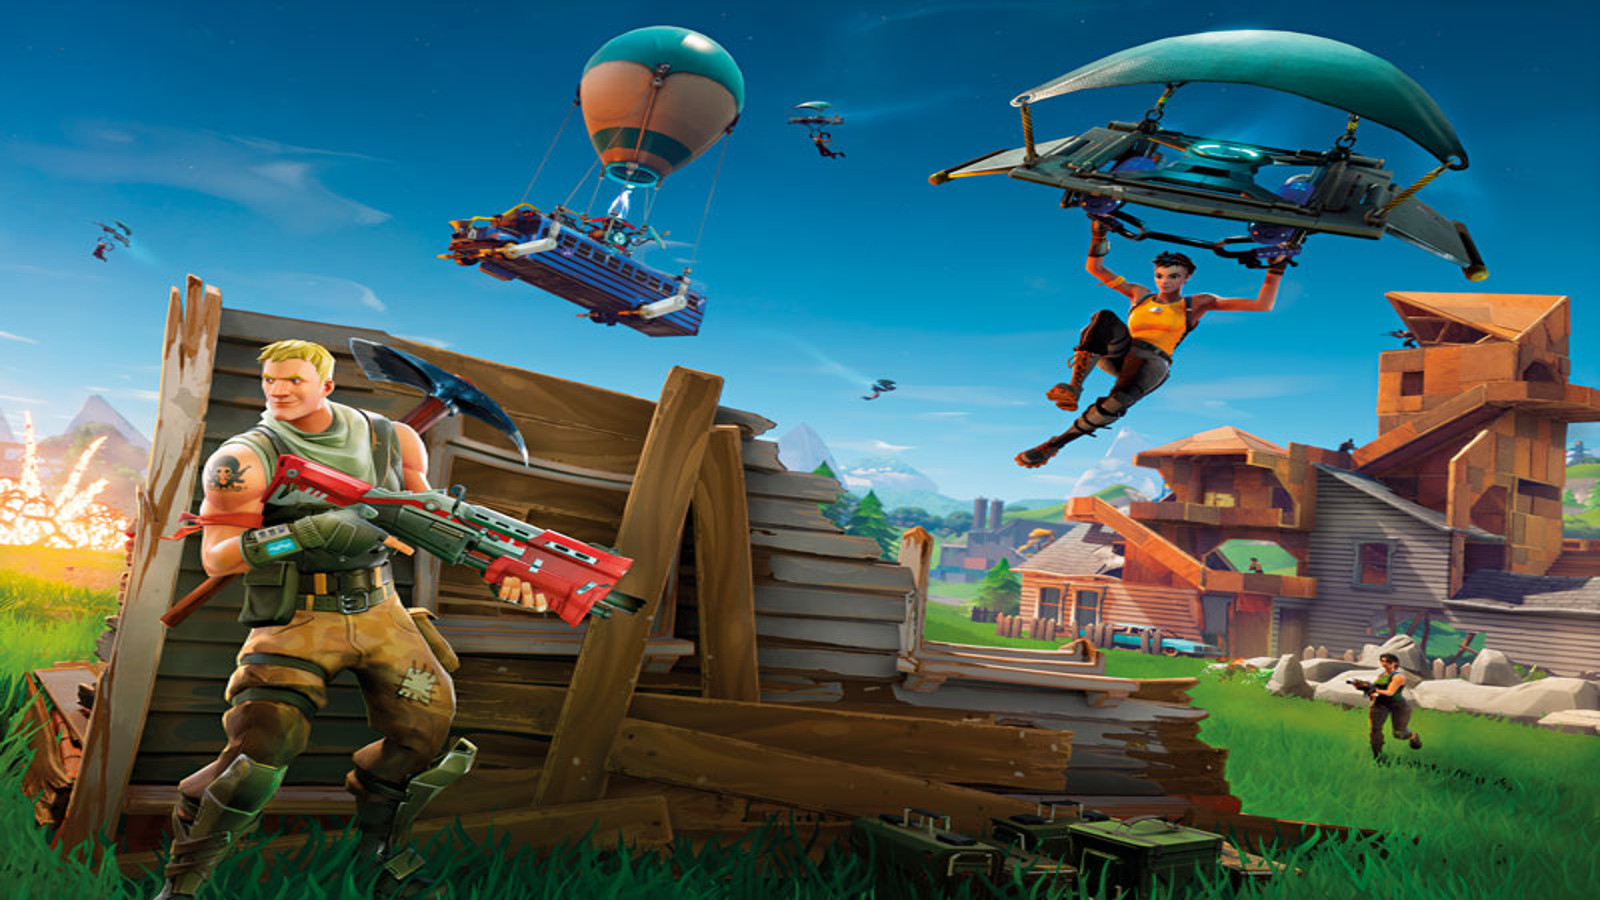 Fortnite Made $9 Billion in Two Years, While Epic Games Store Has